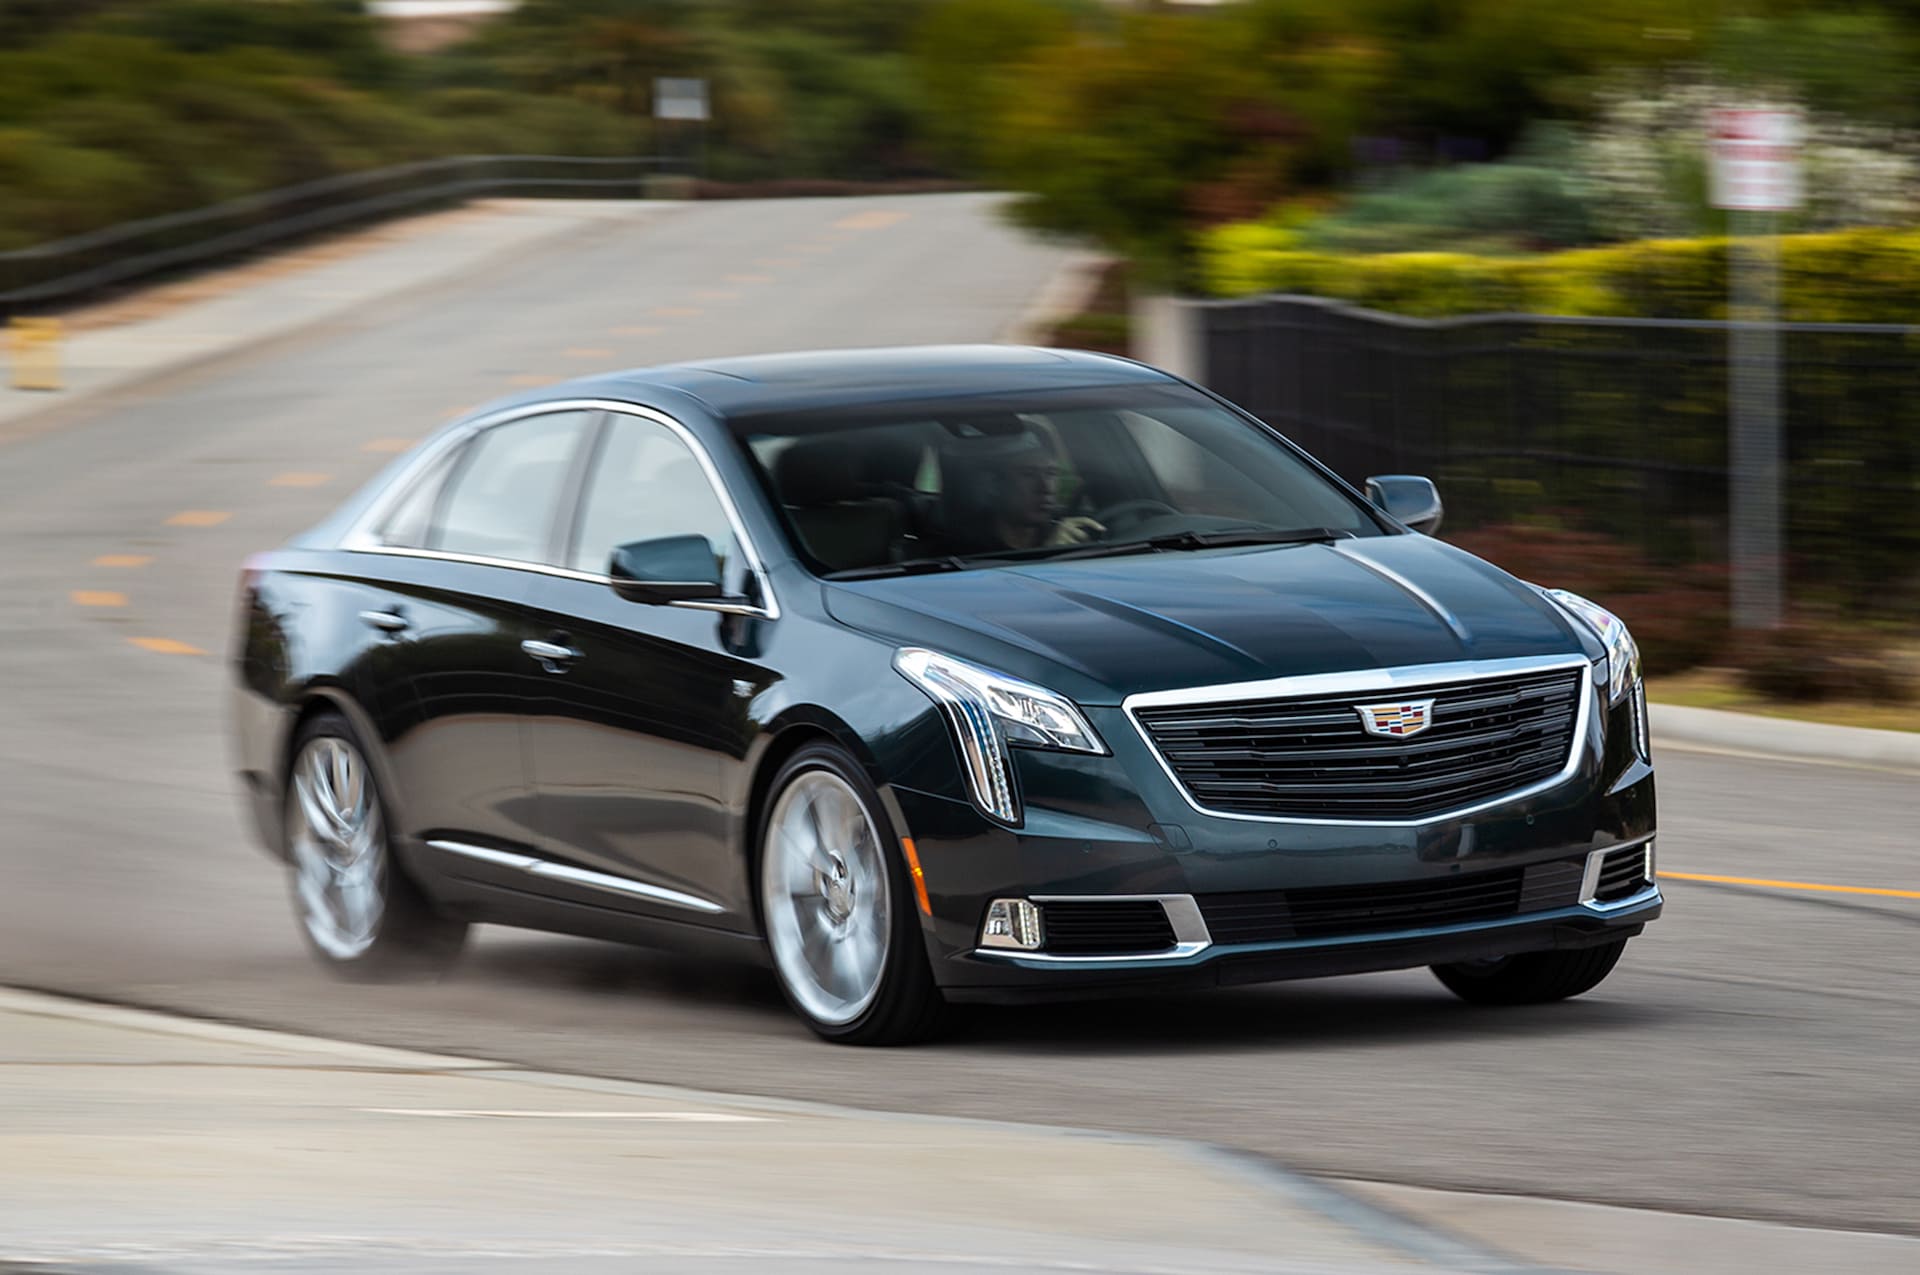 2018 Cadillac XTS V-Sport First Test: Nicer Than You Think, But…